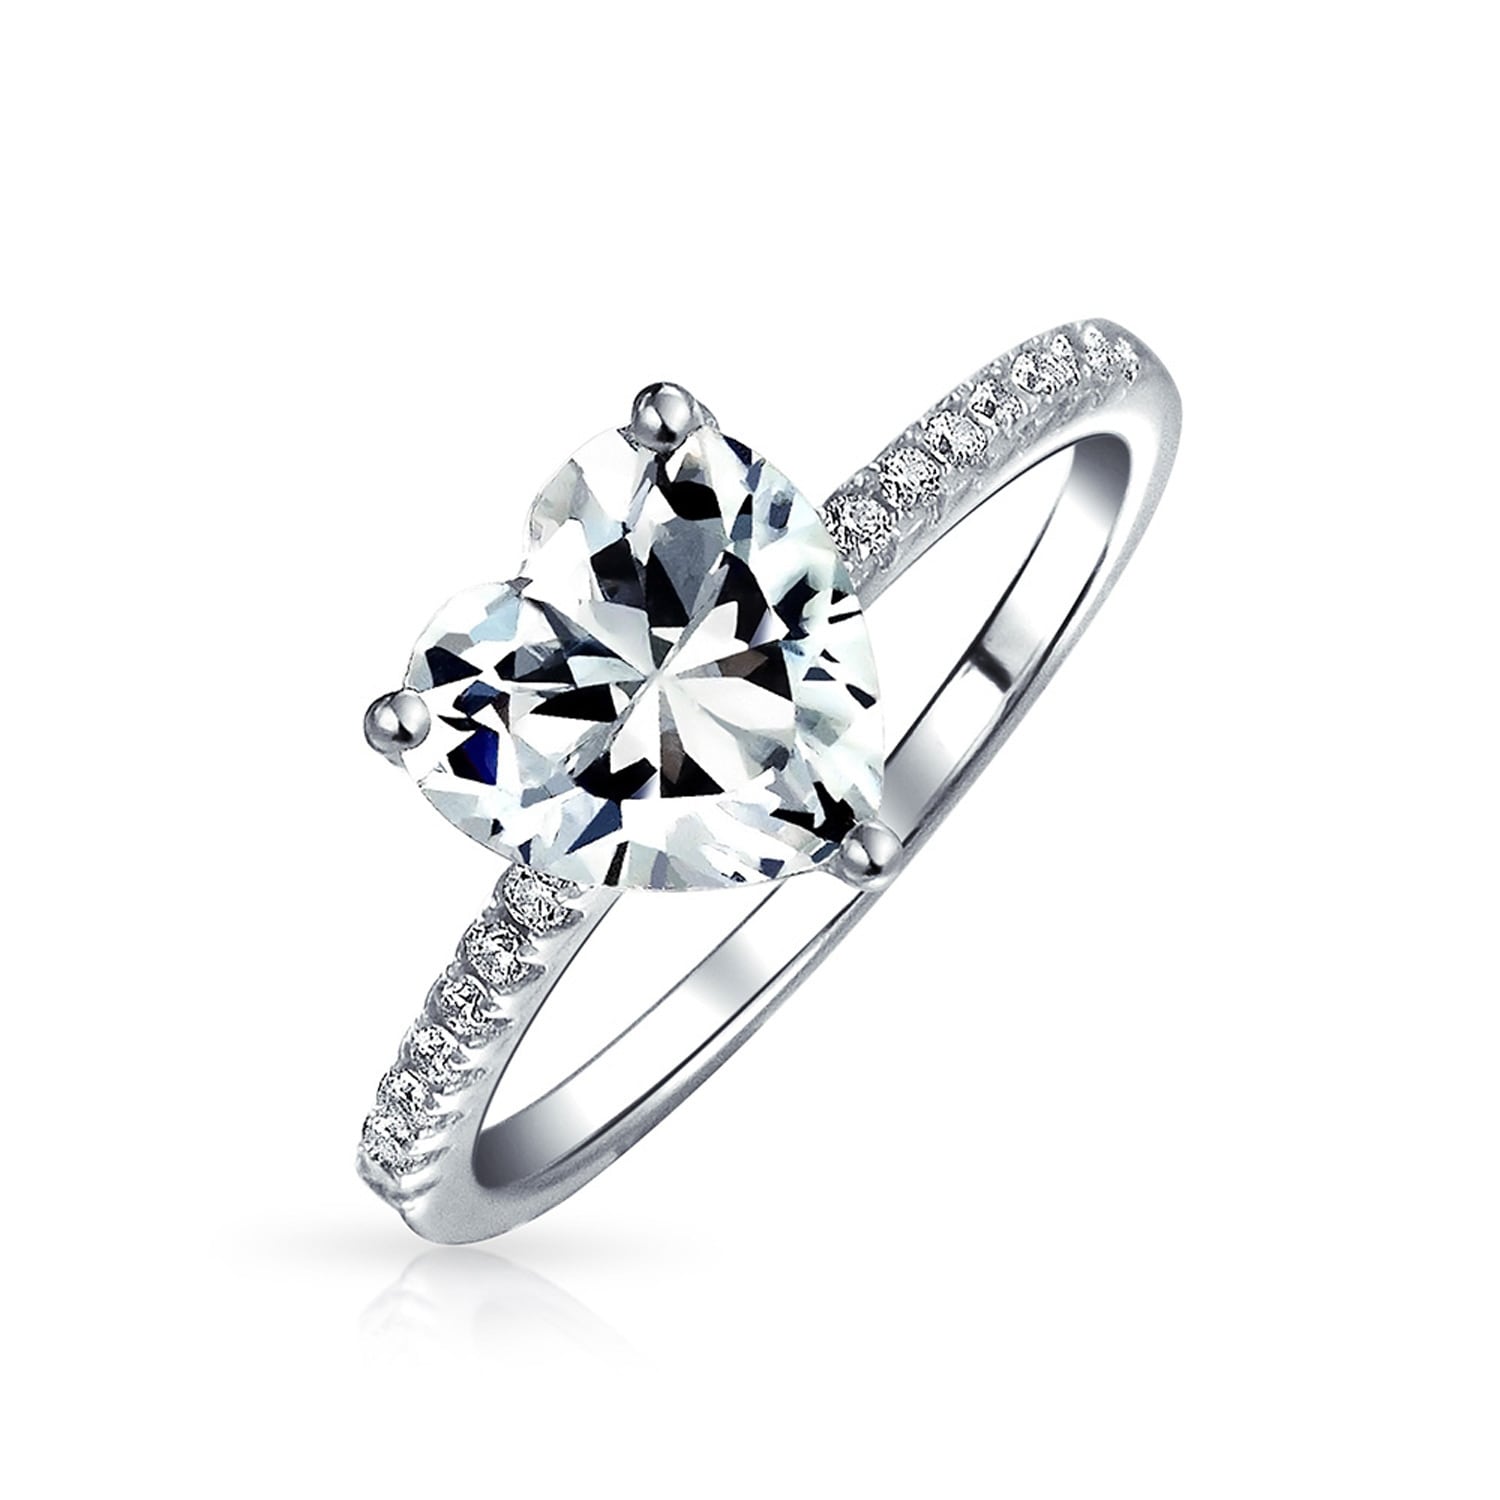 Details about  / Sterling Silver 2CT Solitaire CZ Criss Cross Infinity Engagement Ring